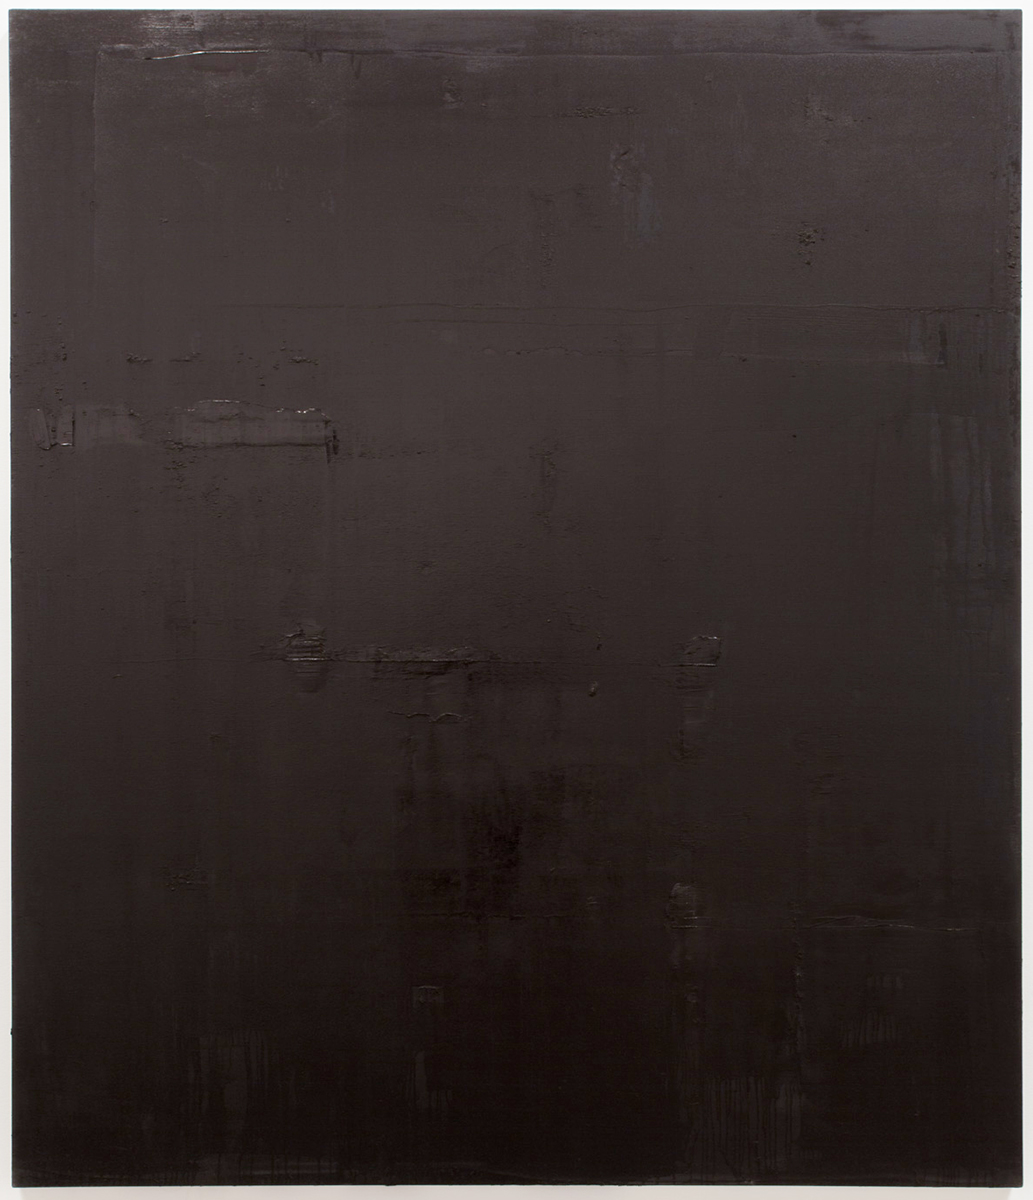  Untitled black monochrome painting (4.10.PBk9.CI77267/PBk11.Fe3O4) from the Frequency10. series. Oil, grit, graphite on canvas, 213.36cm x 182.88cm (84 inches x 72 inches), 2016-2017.    